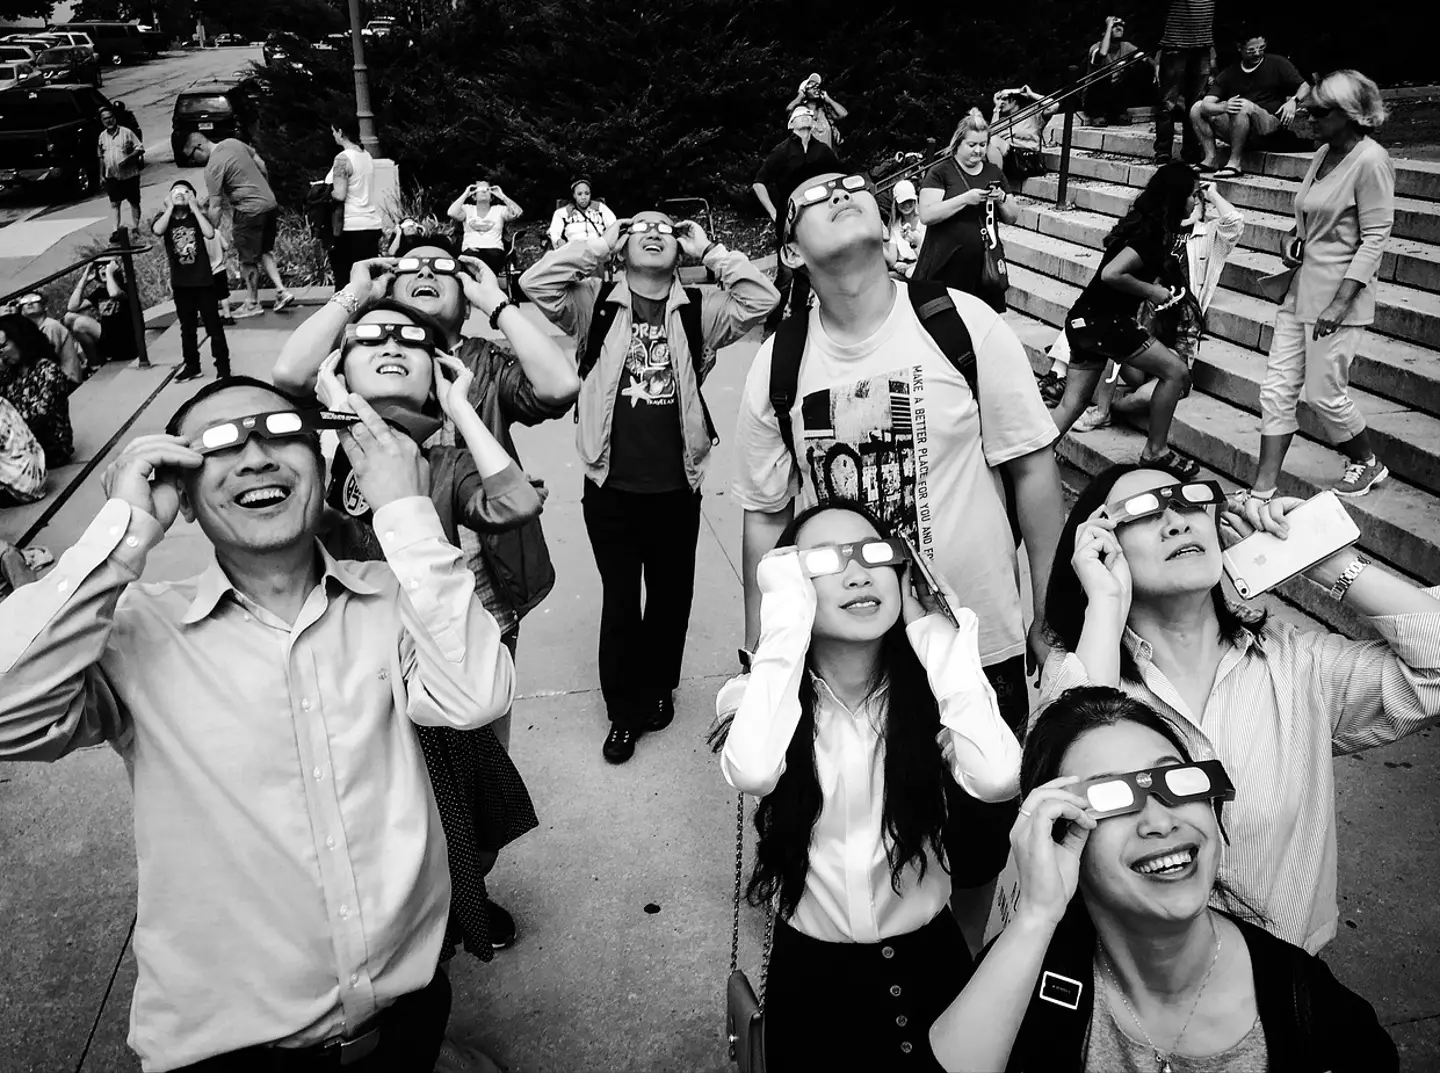 It's advisable to use solar eclipse viewing glasses whilst observing.